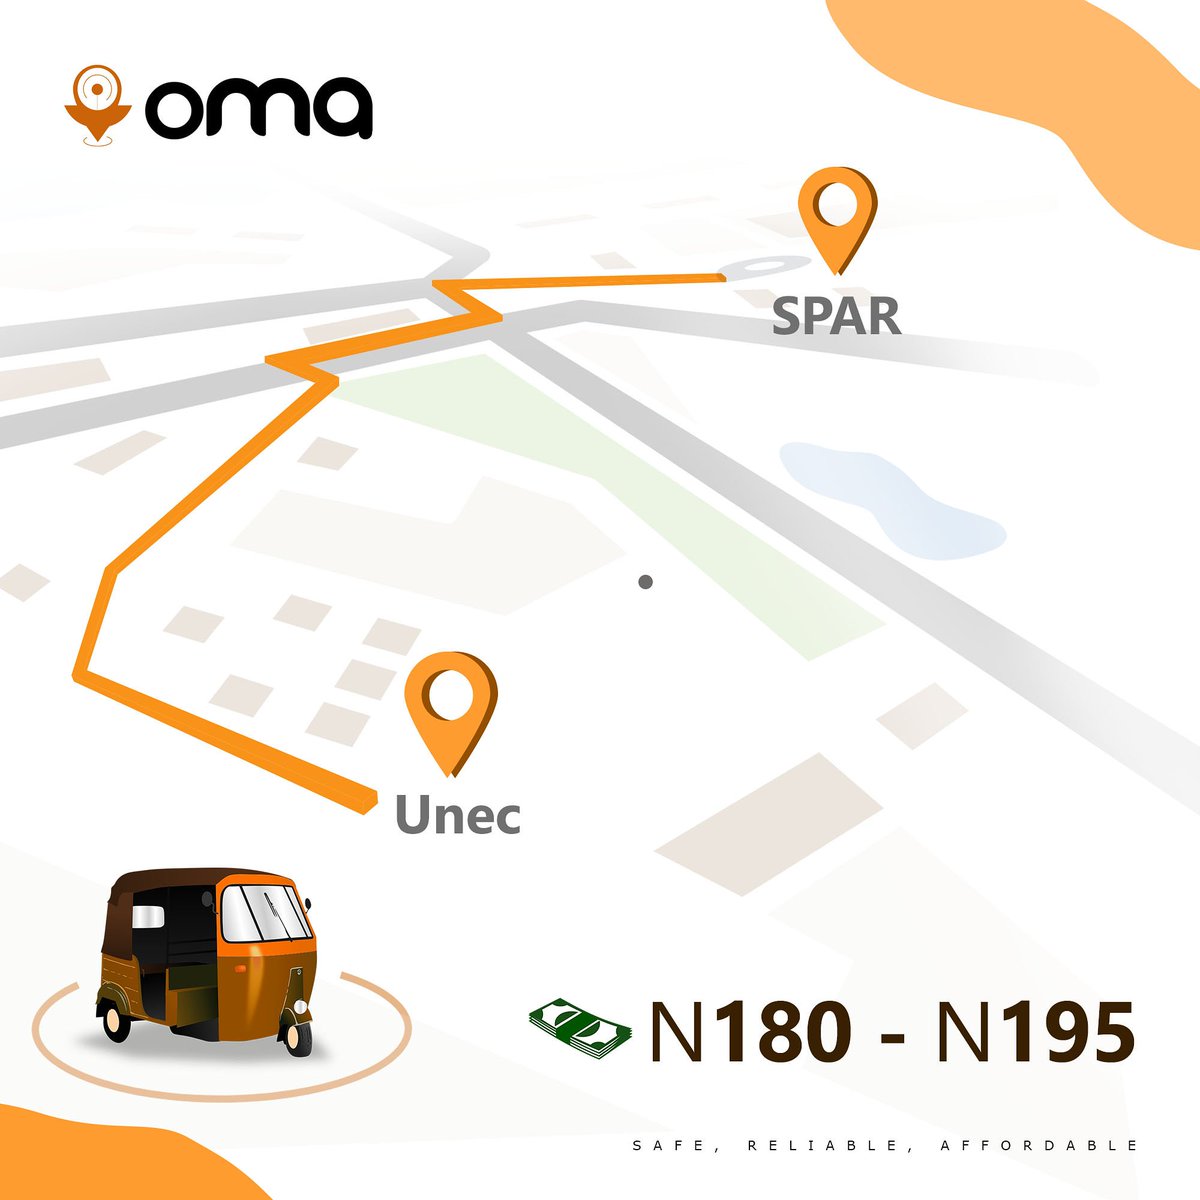 Your satisfaction being our goal...we are proud to introduce to you our new unbeatable fare rates! .
.
Enjoy rides at reduced prices
.
#Oma #omakeke
#affordablerides #ridewithomaarriveinstyle